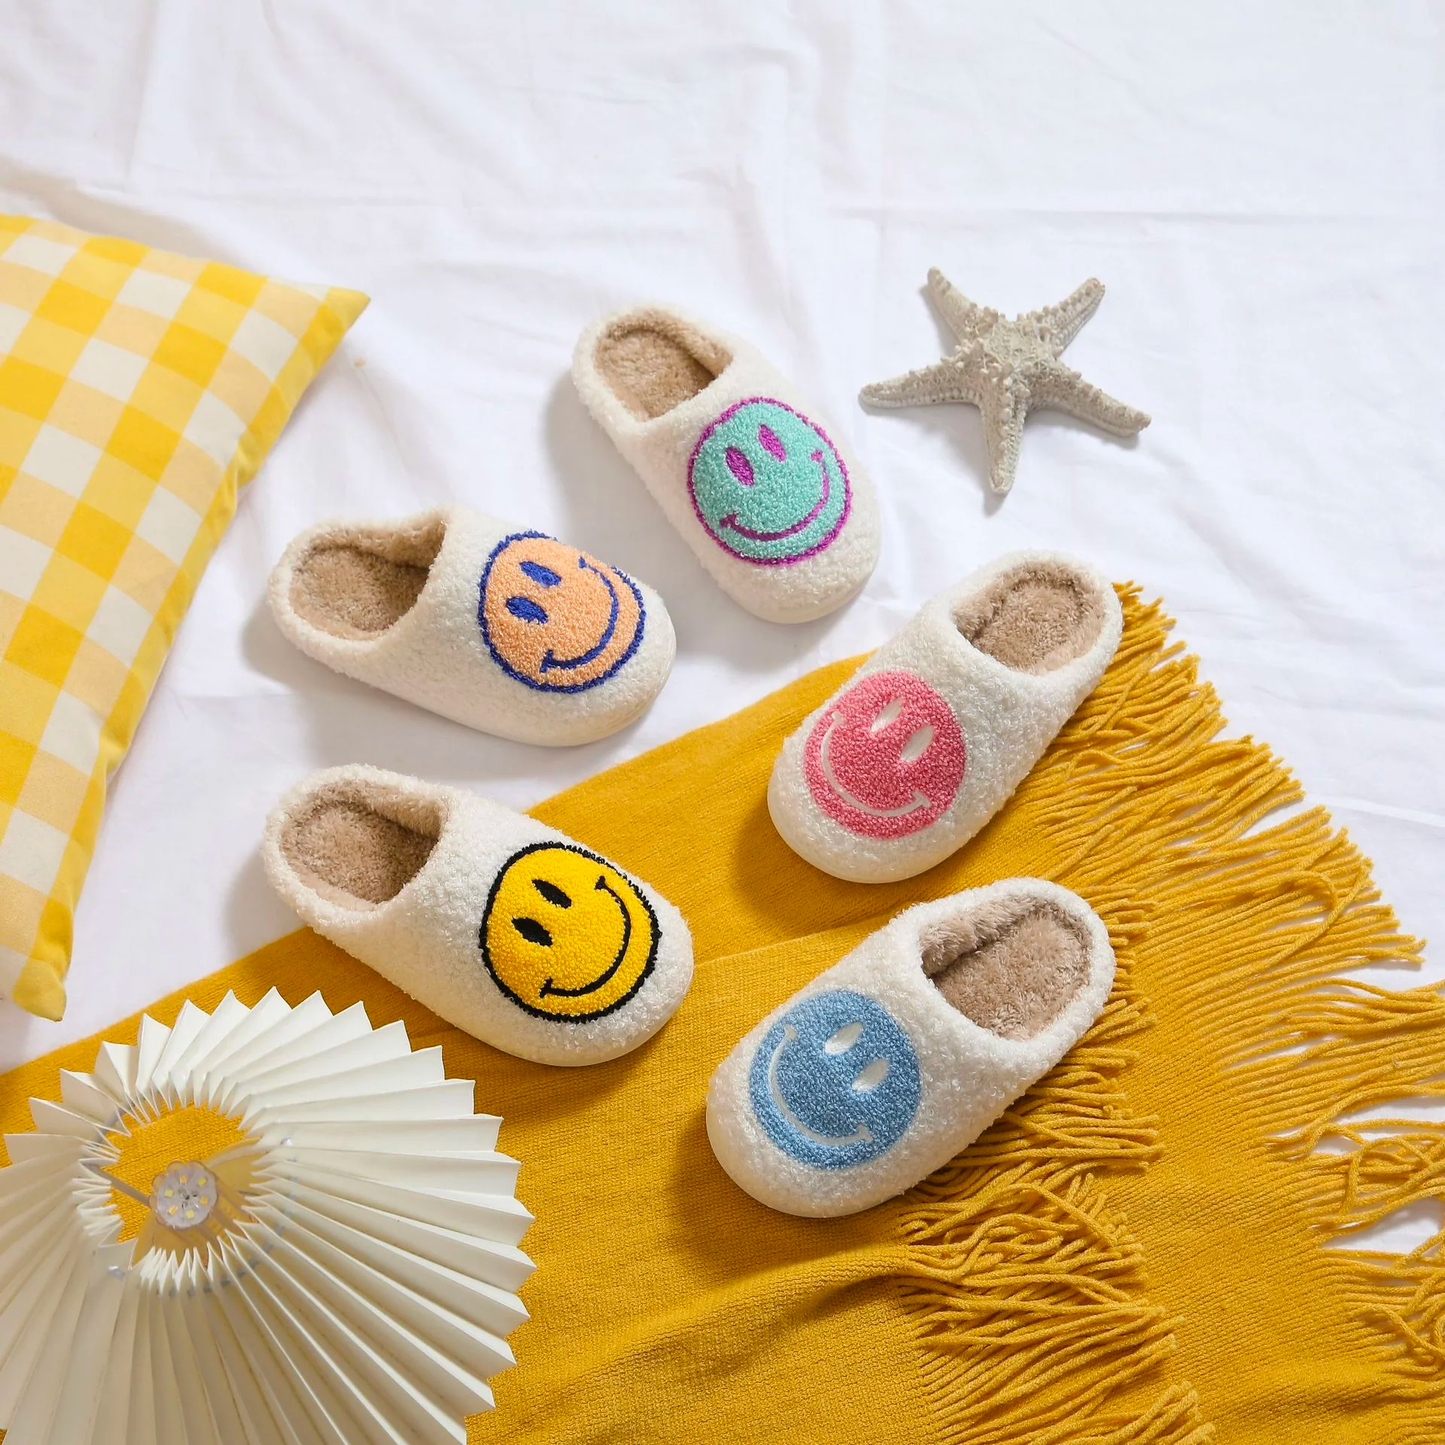 The Ultimate White Smiley Face Slippers A Guide to Comfort and Style